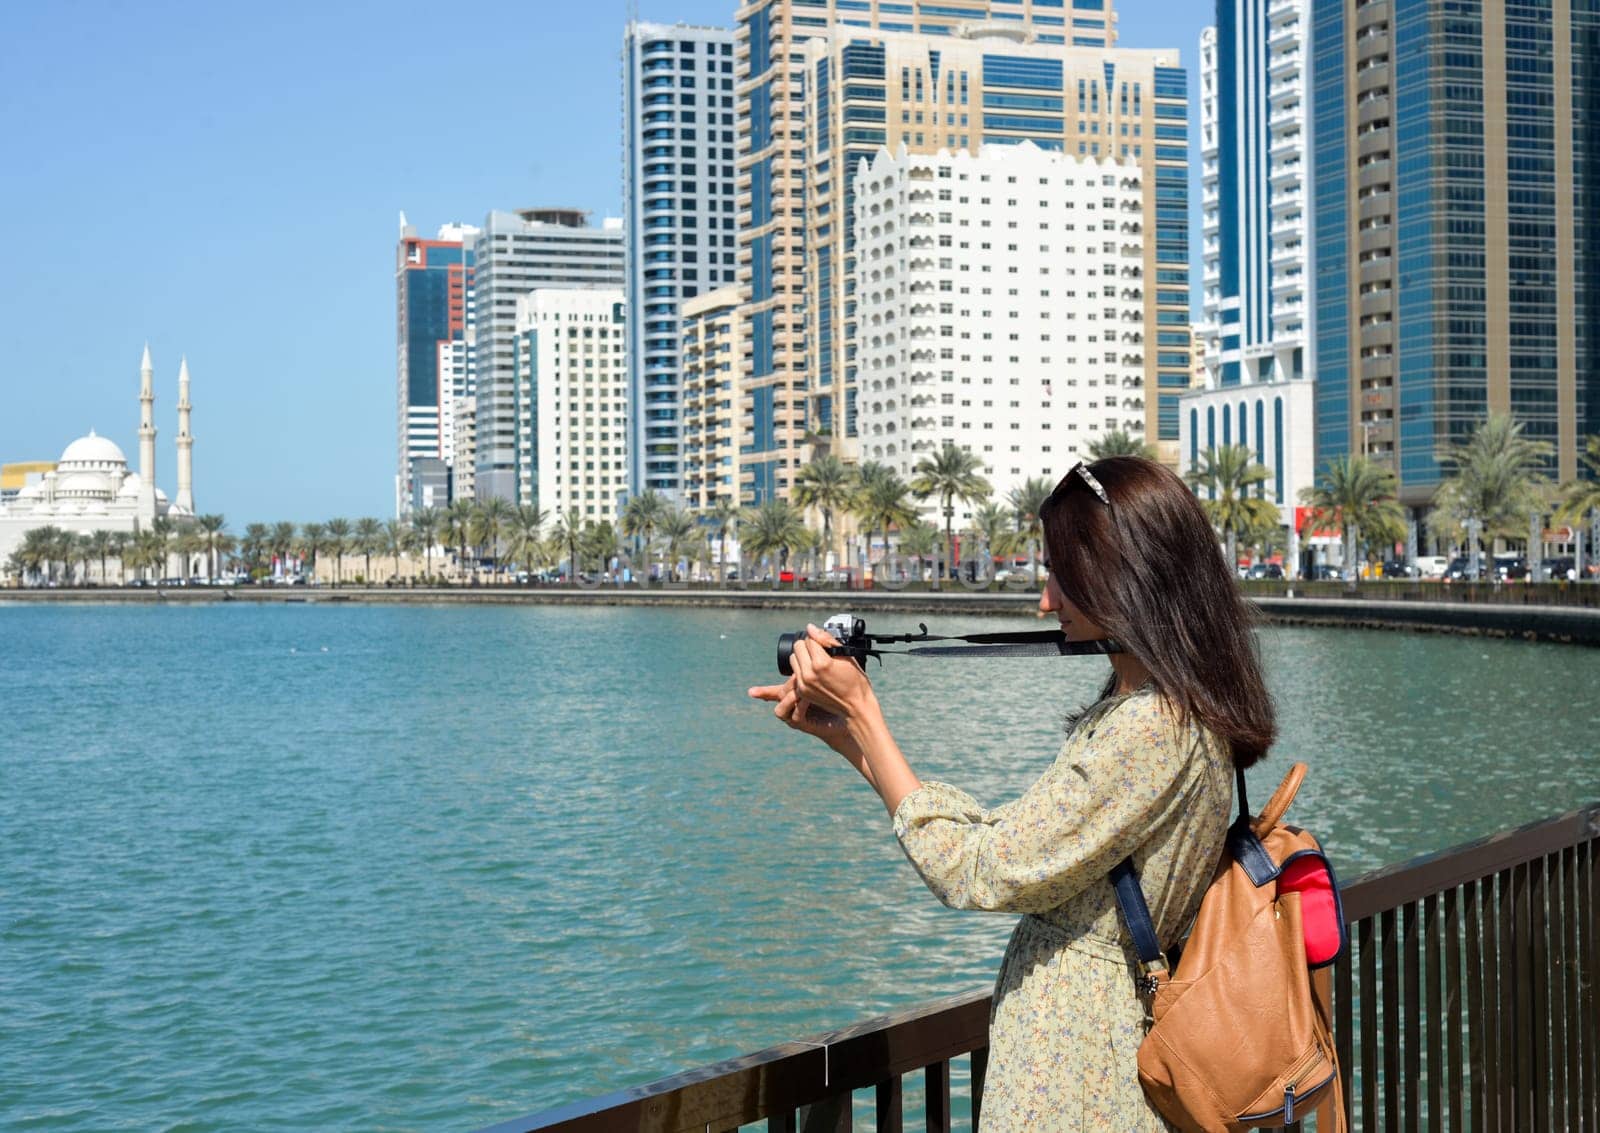 A woman in a long dress with a backpack walks with a camera along the Al Majaz embankment, Lake Khaled, Sharjah emirate. Rear view of a woman photographing the embankment by Ekaterina34